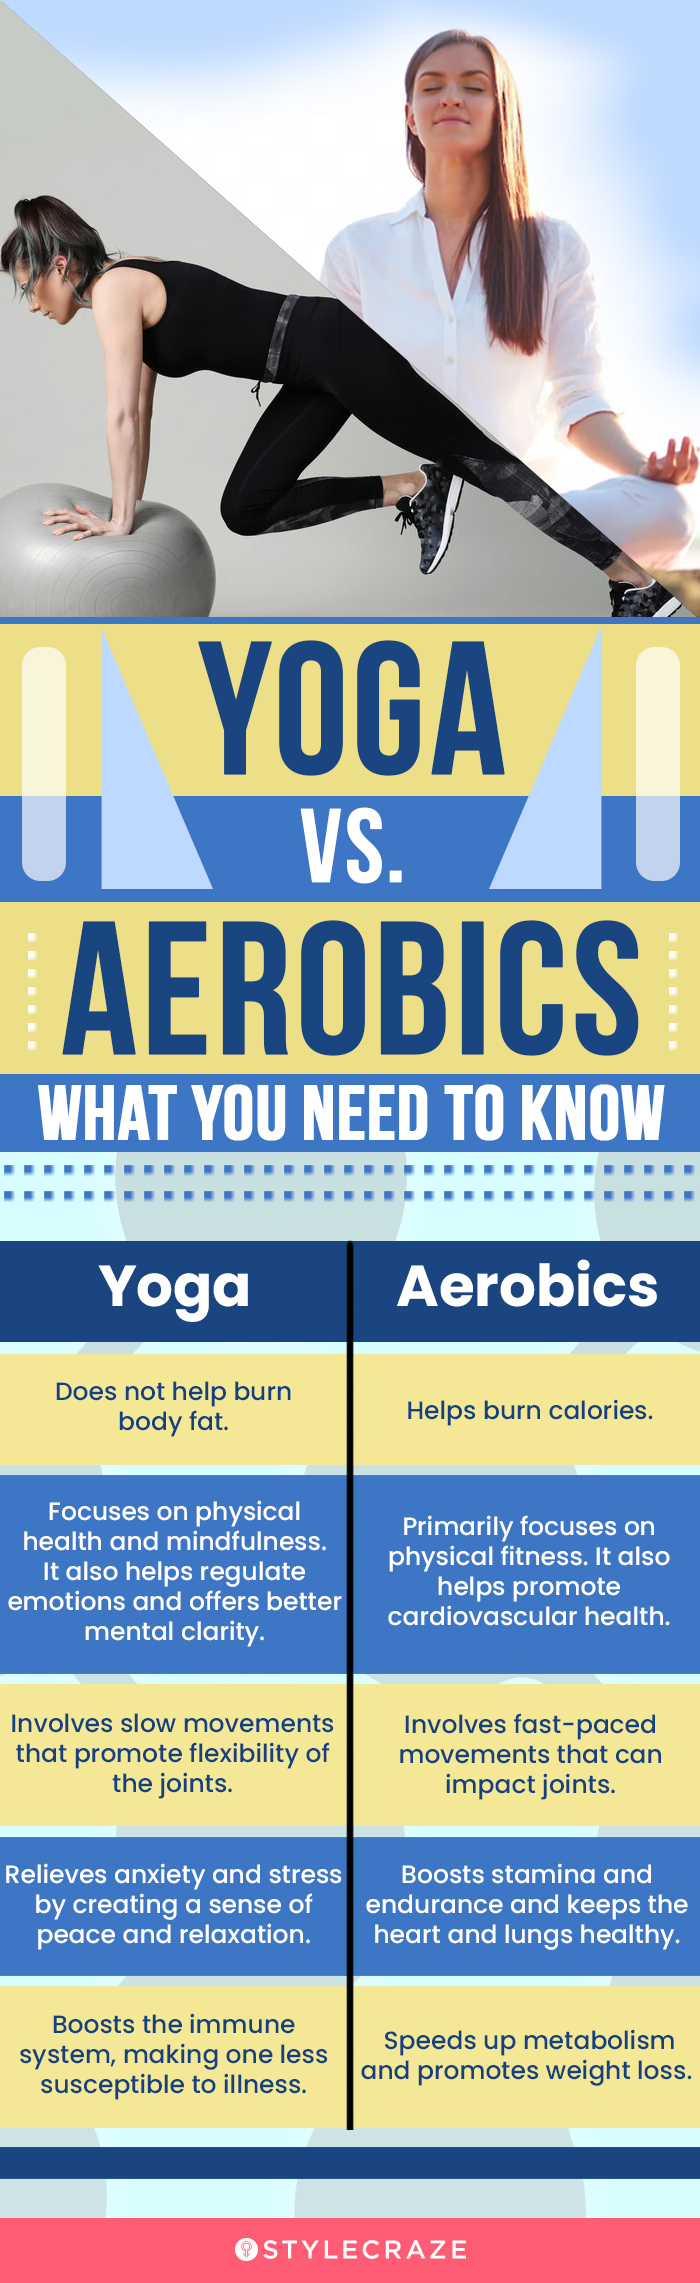 key differences between yoga and aerobics (infographic)